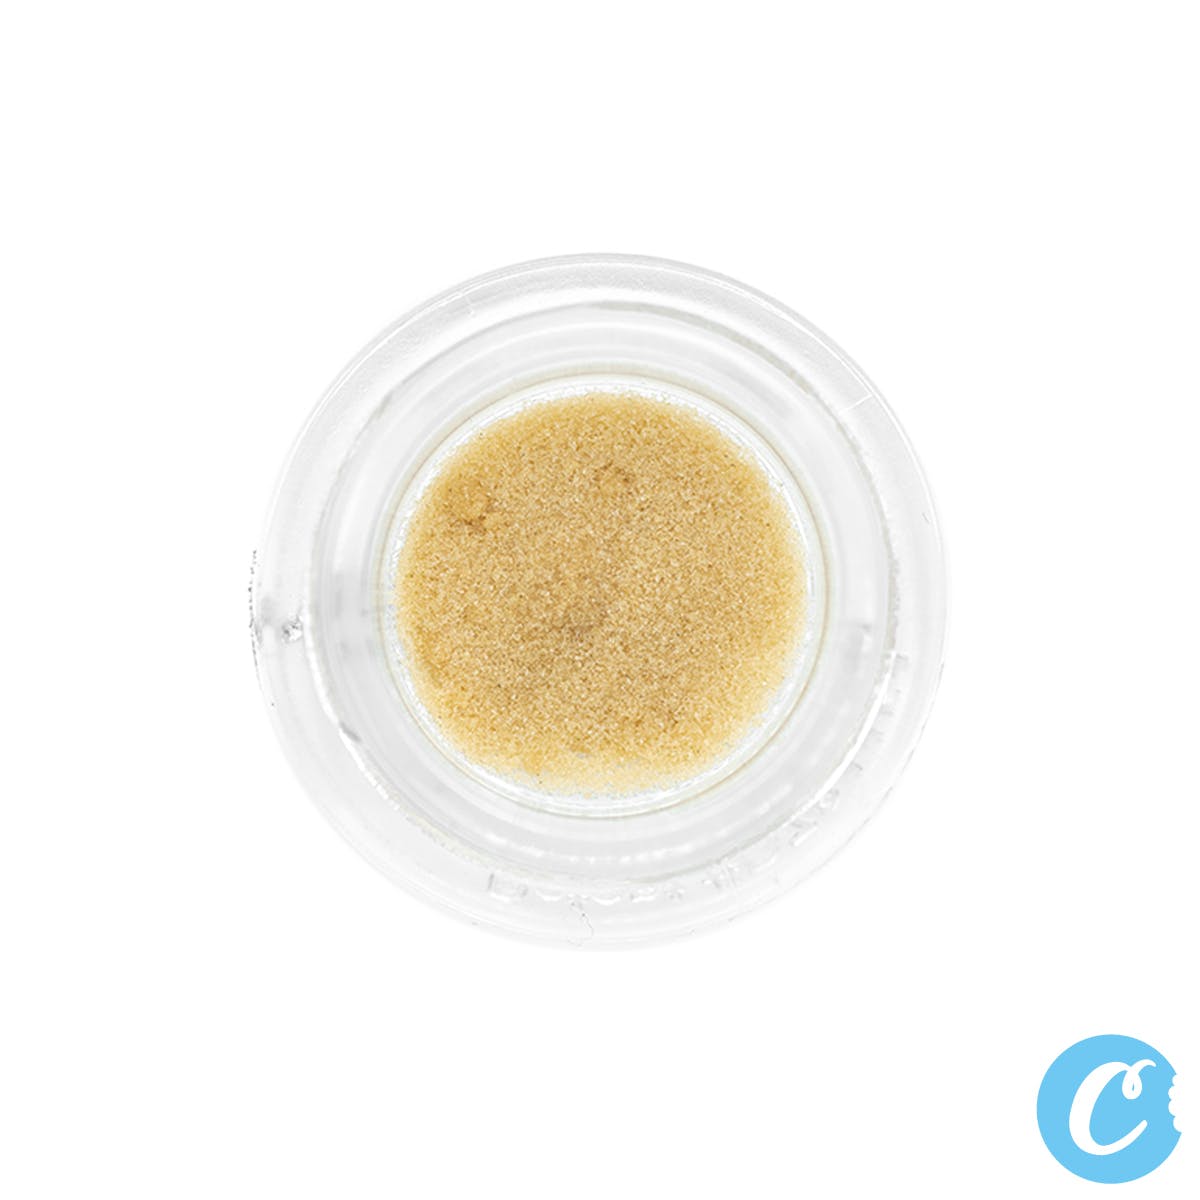 FIELD EXTRACTS ICE WATER HASH - Strawberry Banana